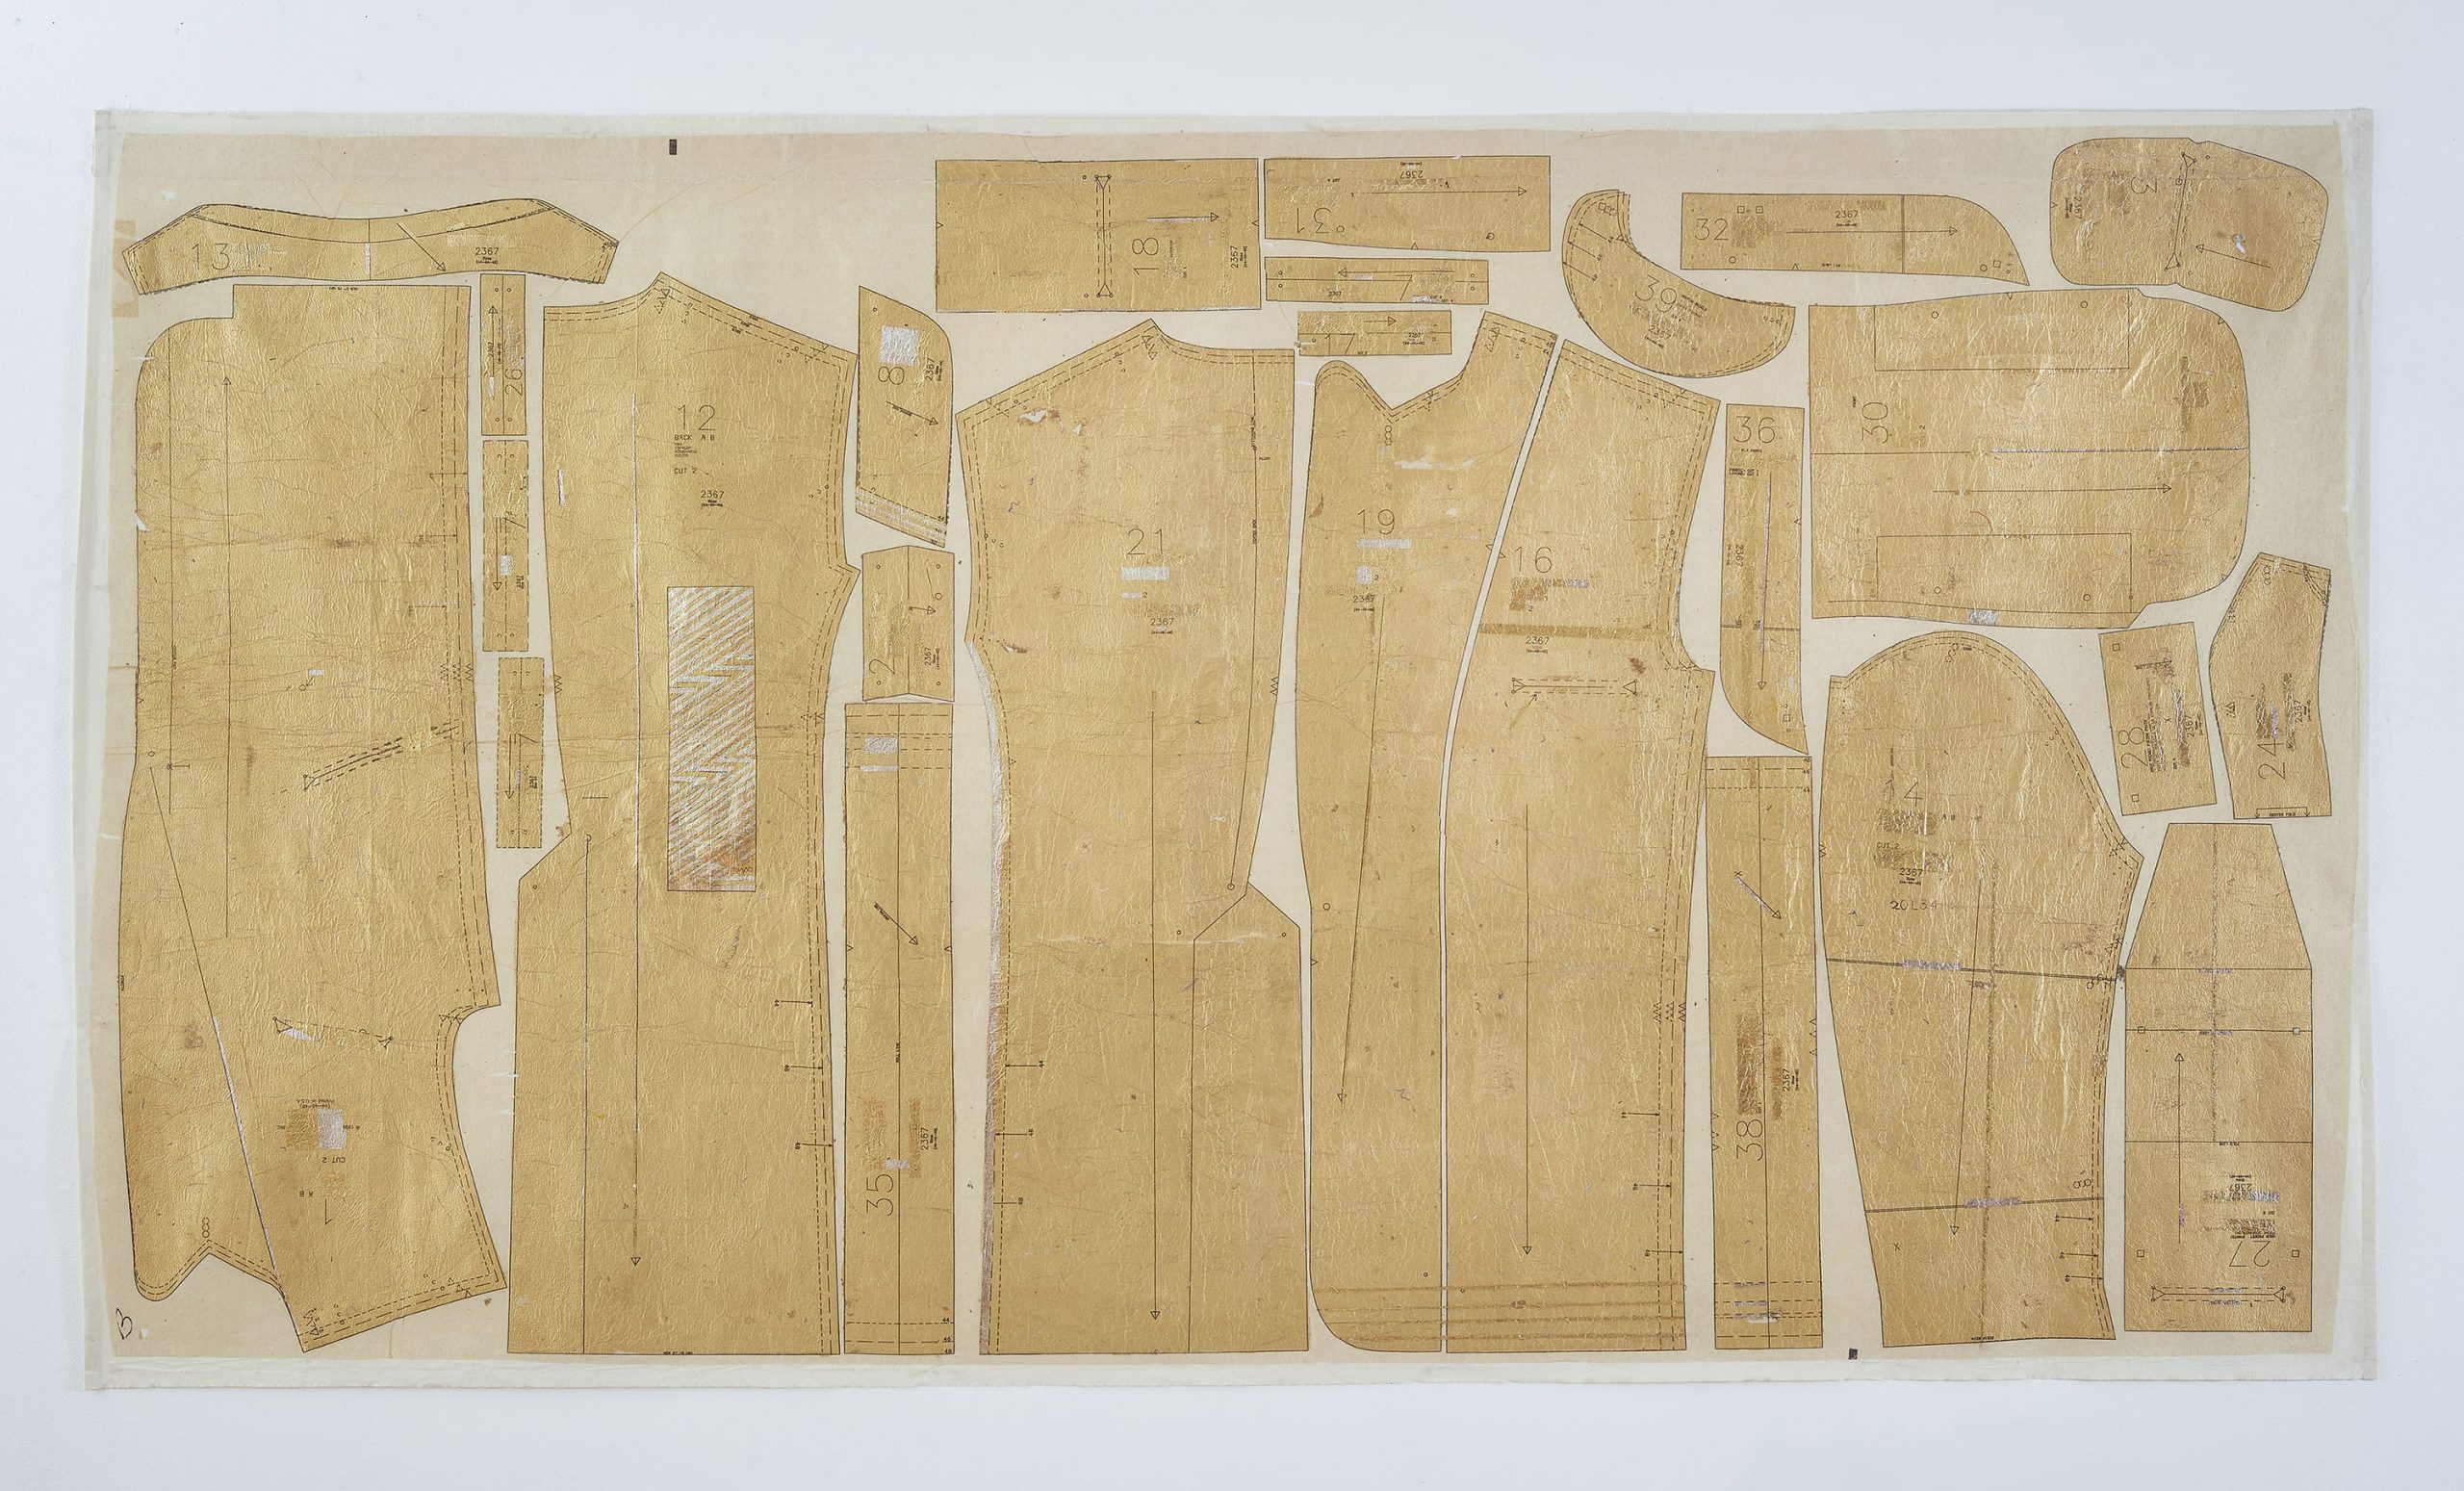 Ronny Quevedo, pachuco, pacha, p’alante, 2019, 50 x 90 in. (127 x 228.6 cm), pattern paper and gold leaf on muslin